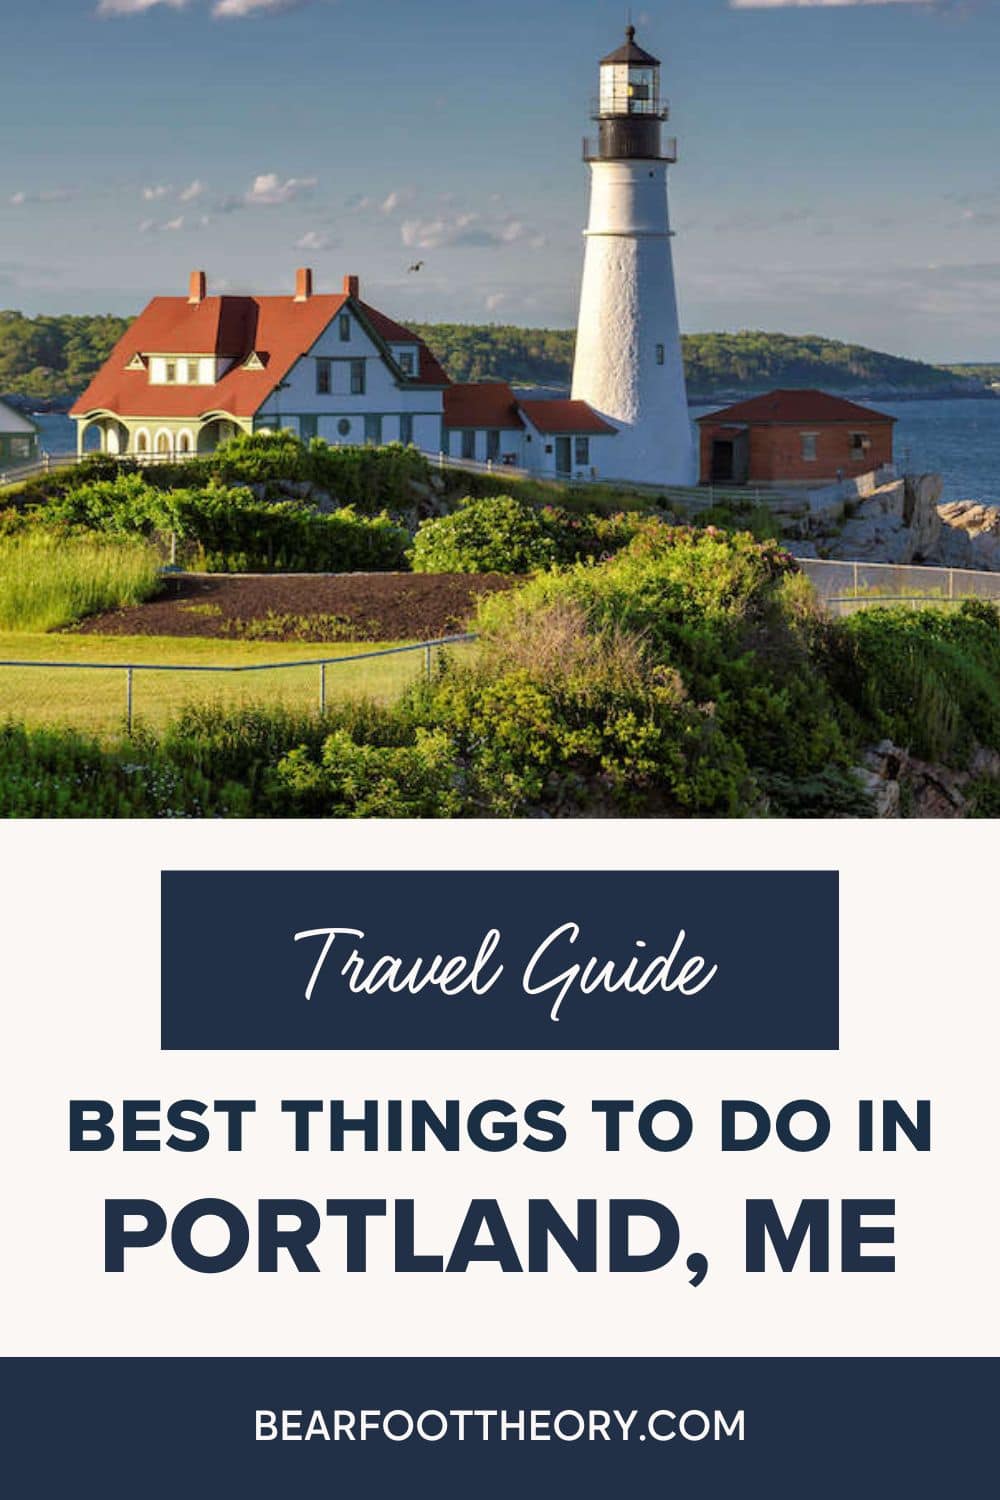 Discover the best things to do in Portland, Maine with this locals' guide including outdoor adventures best places to eat/drink, and more.